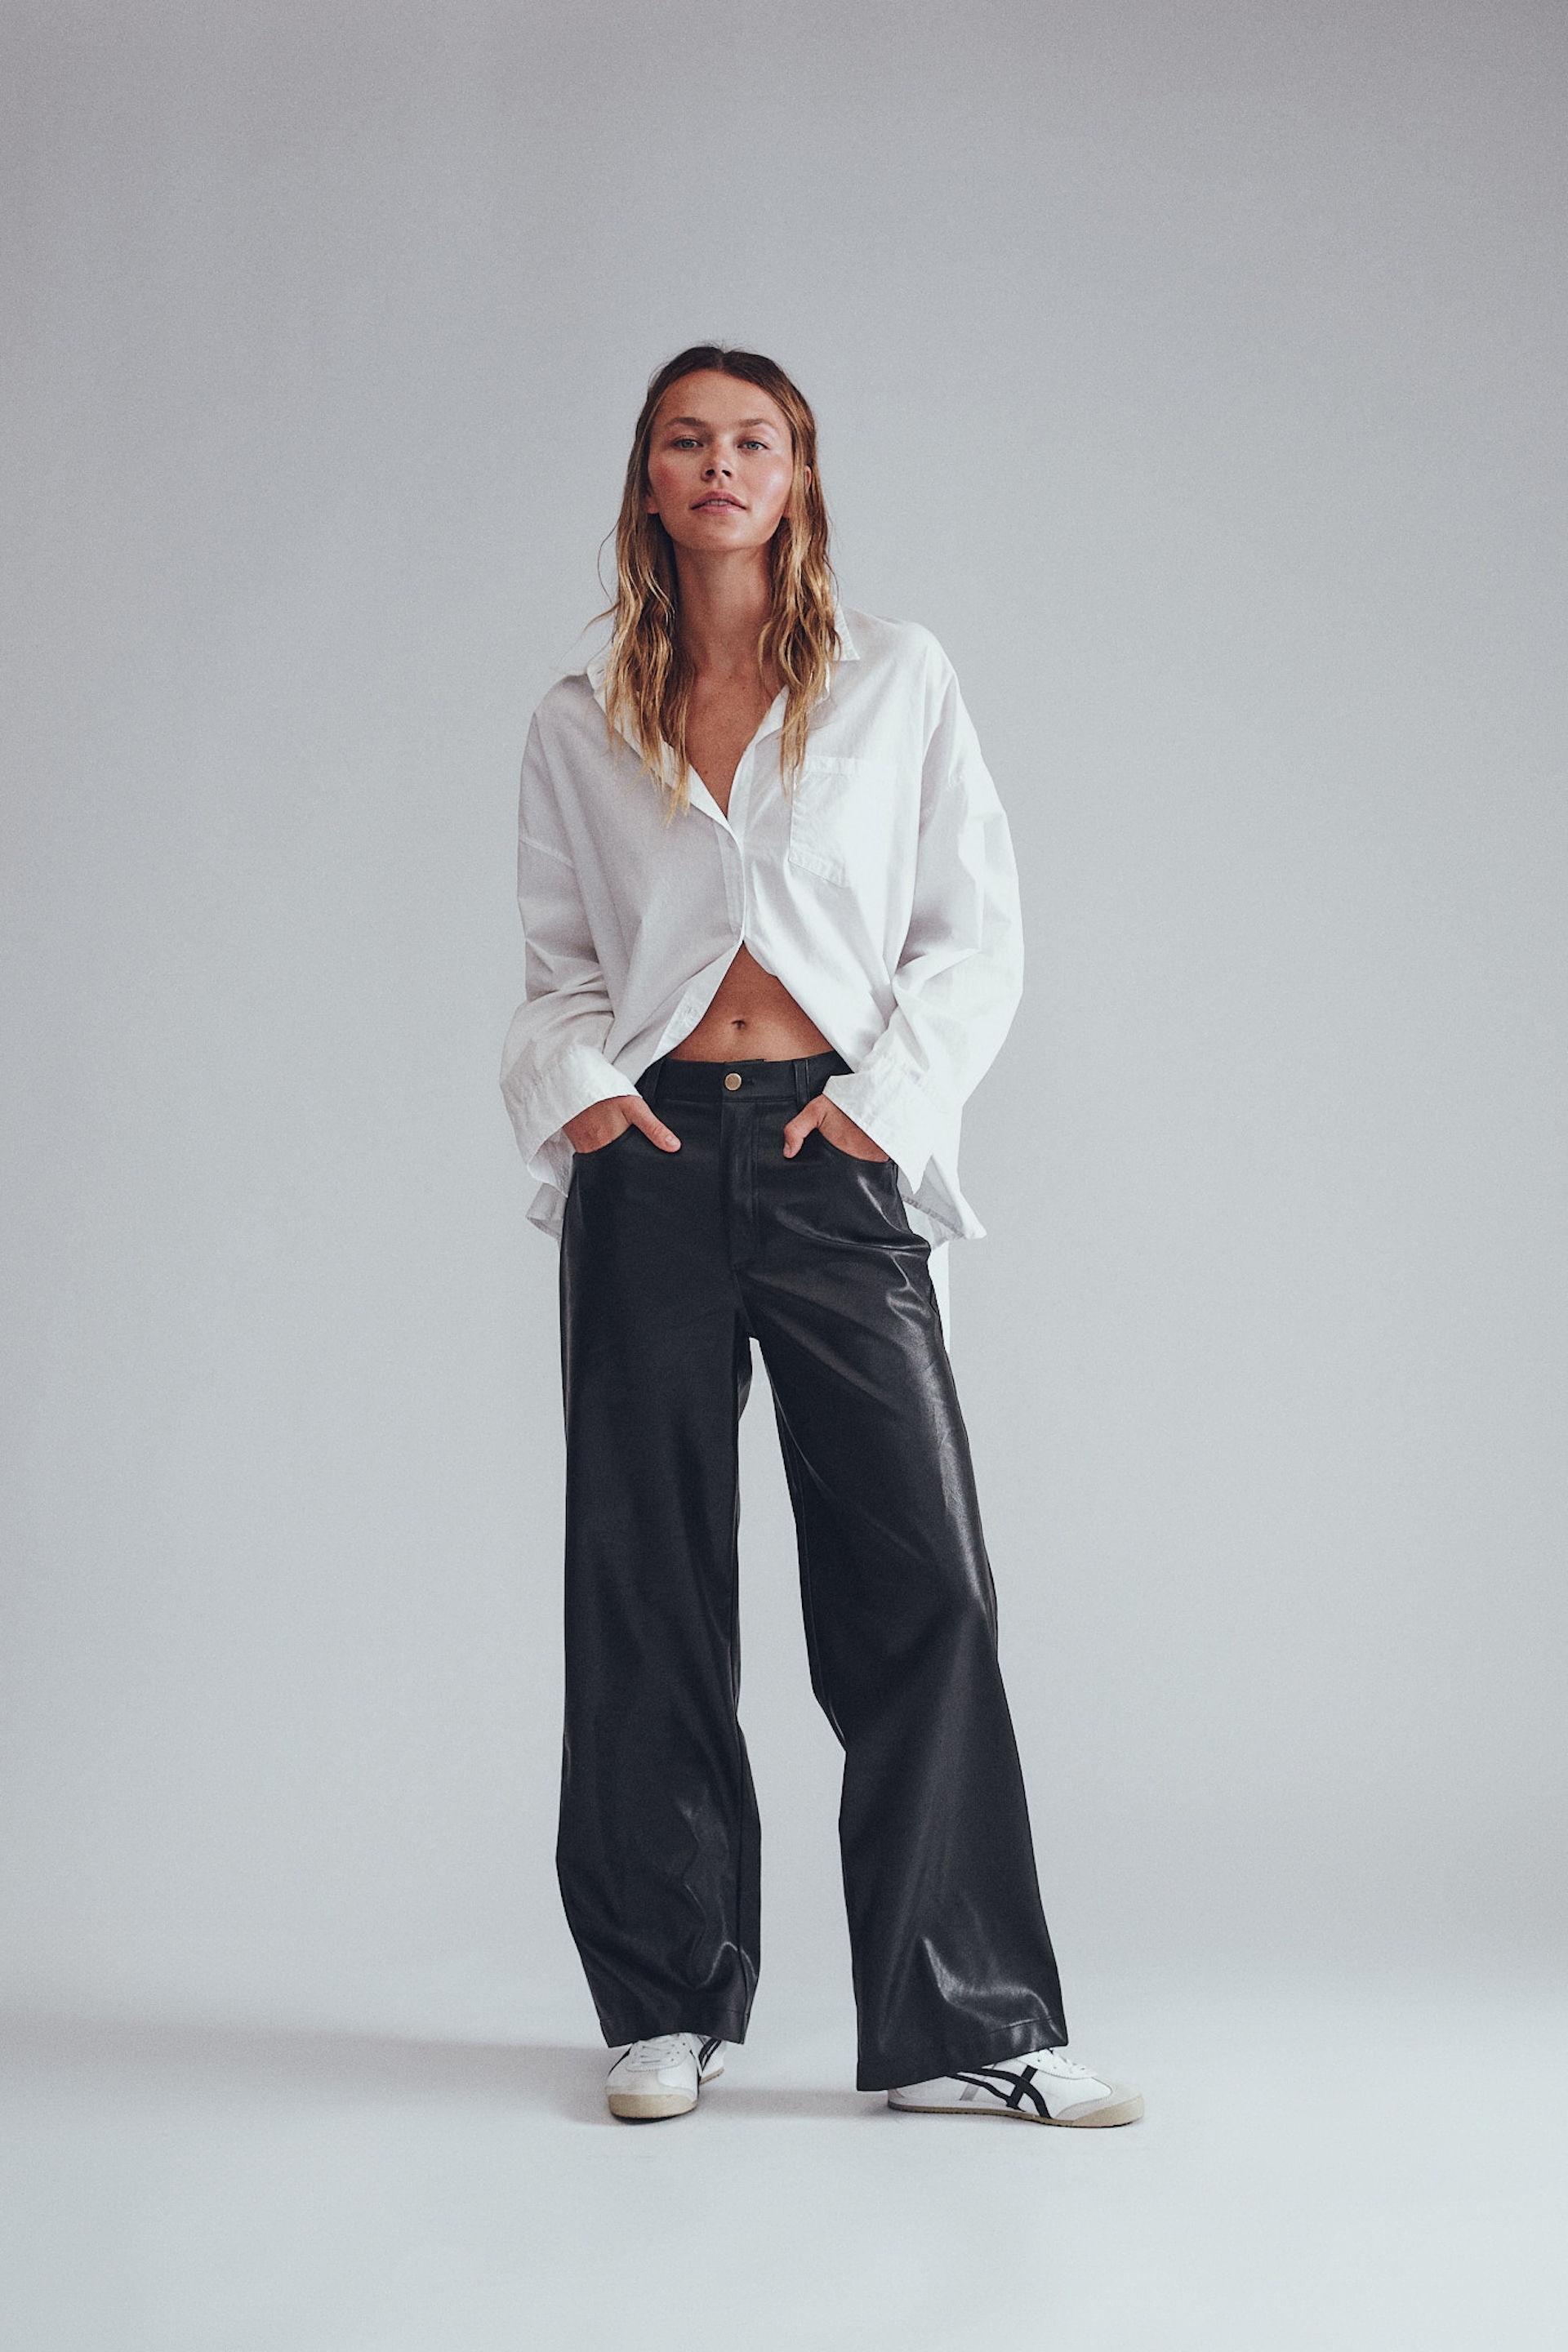 UNreal Patent Leather Trouser in Mahogany | Blue Revival